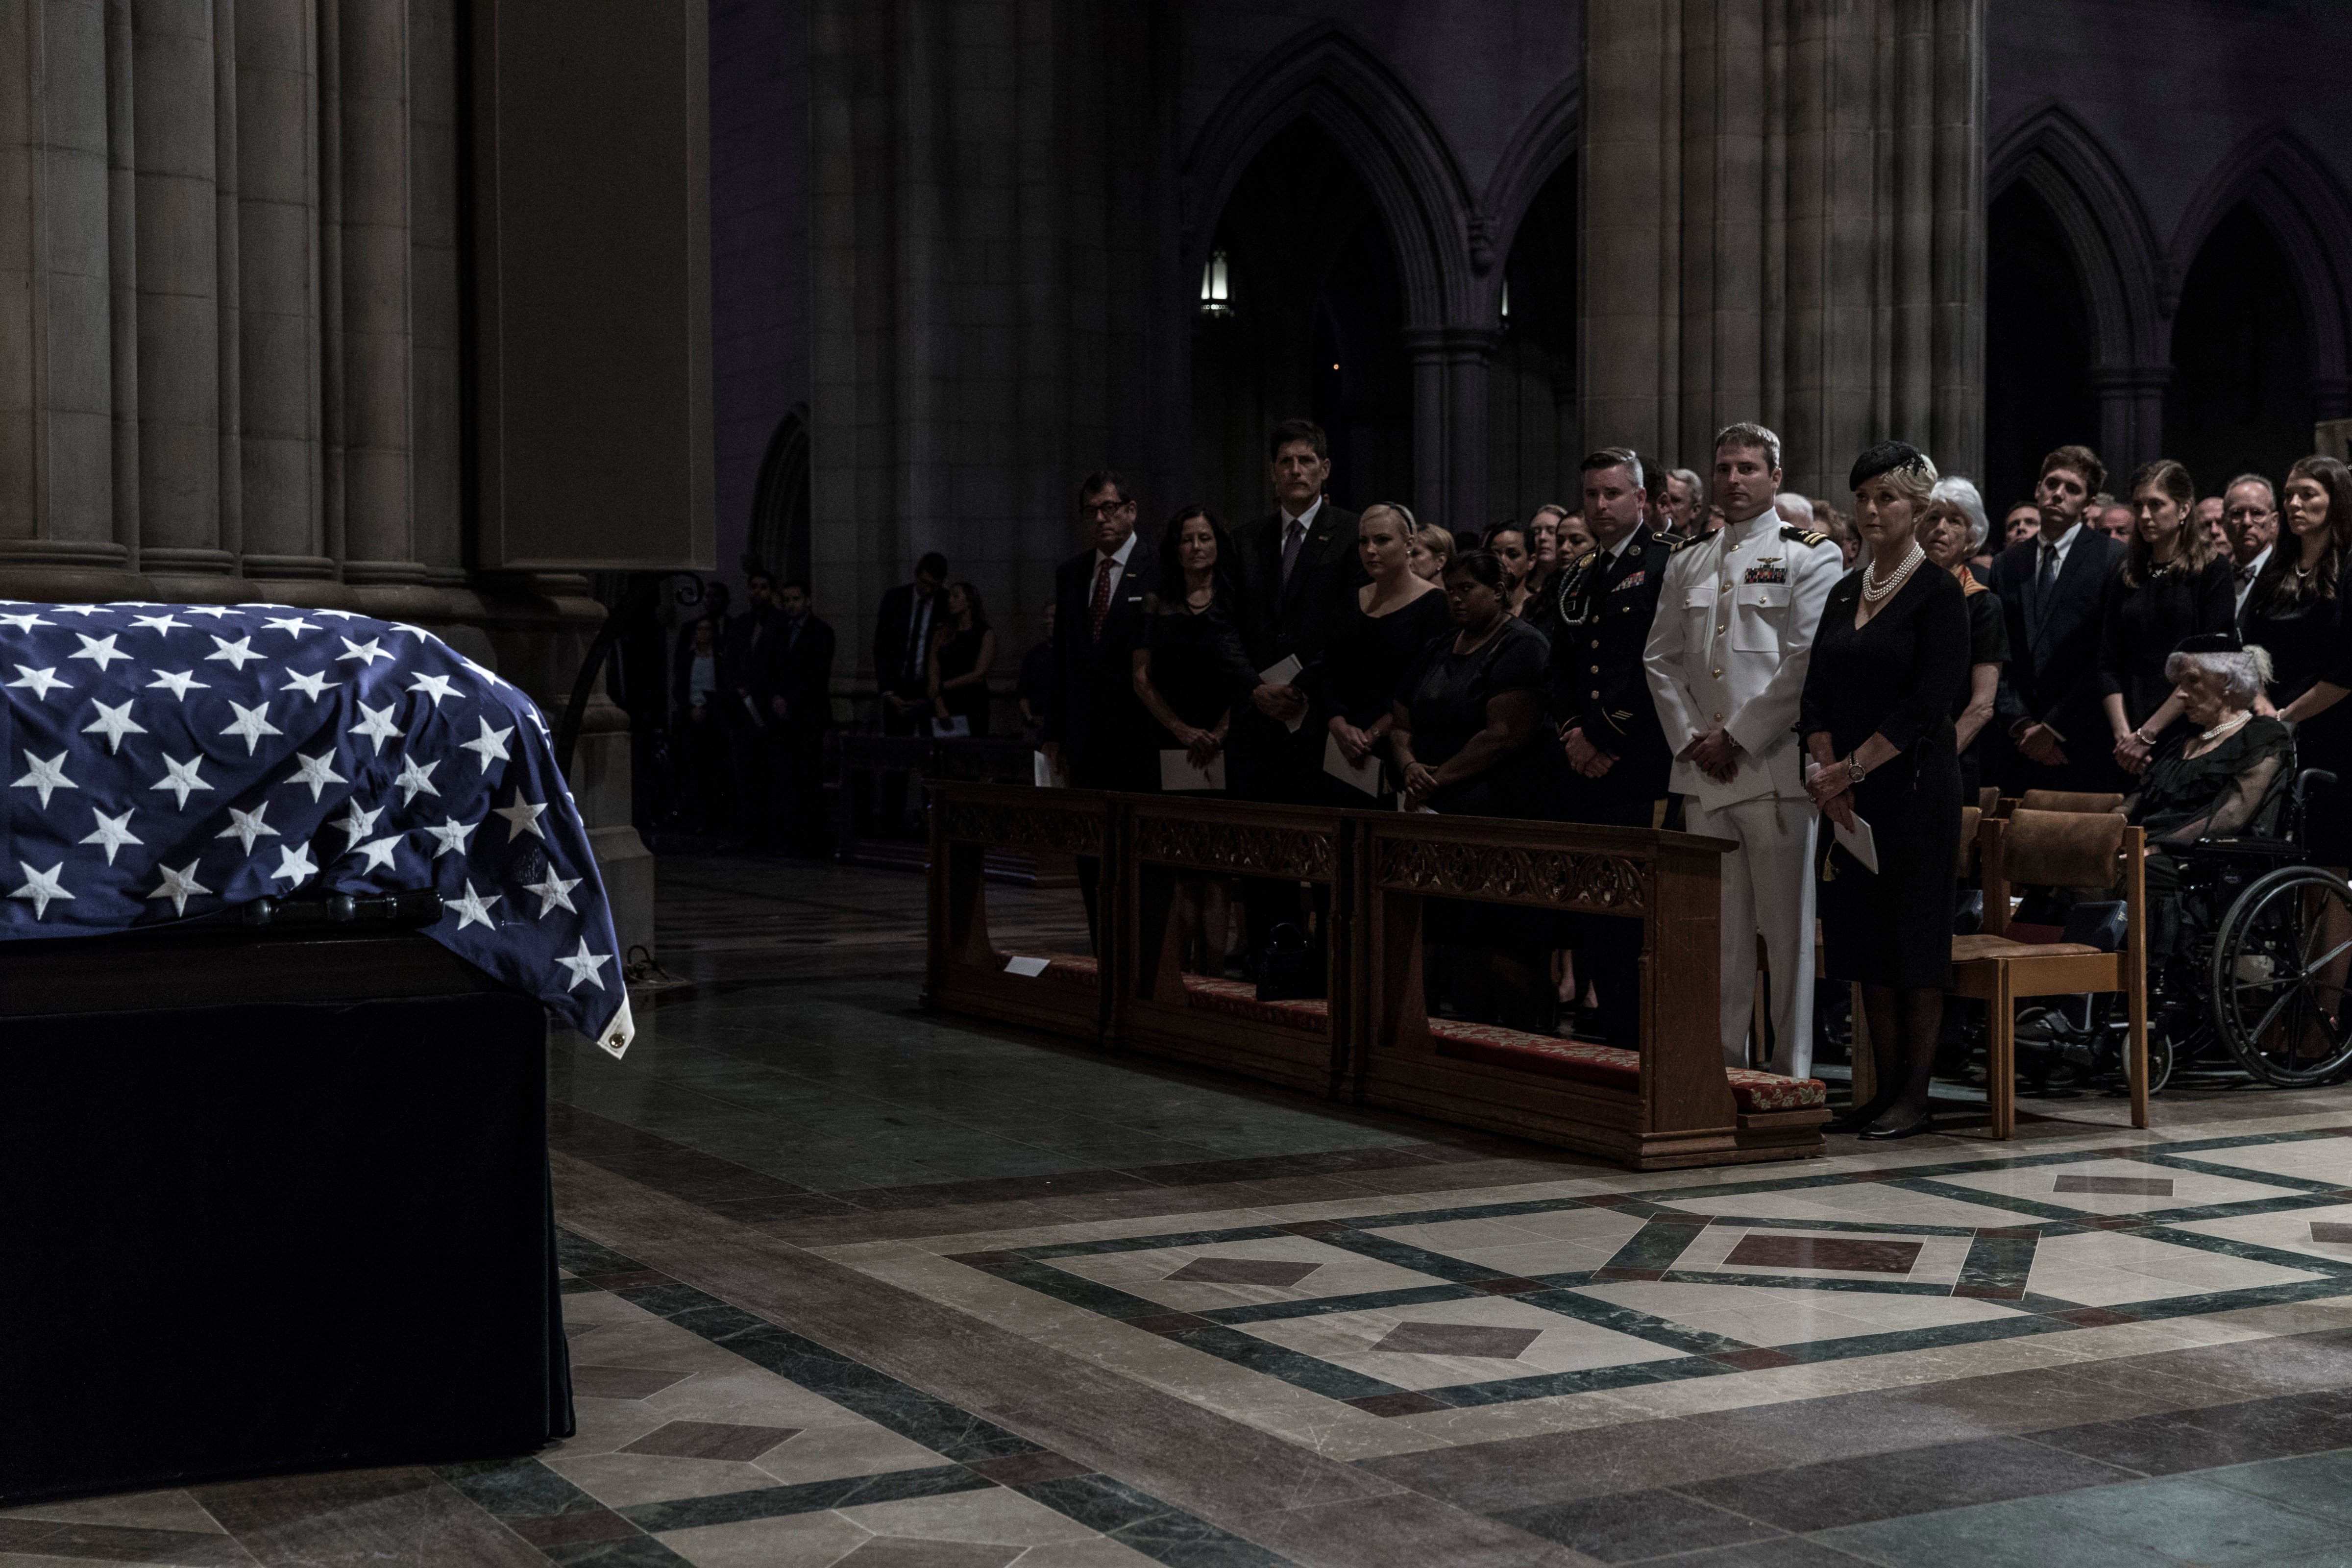 The McCain family at the memorial service for Sen. John McCain at the Washington National Cathedral on September 1, 2018. (Christopher Morris—VII for TIME)